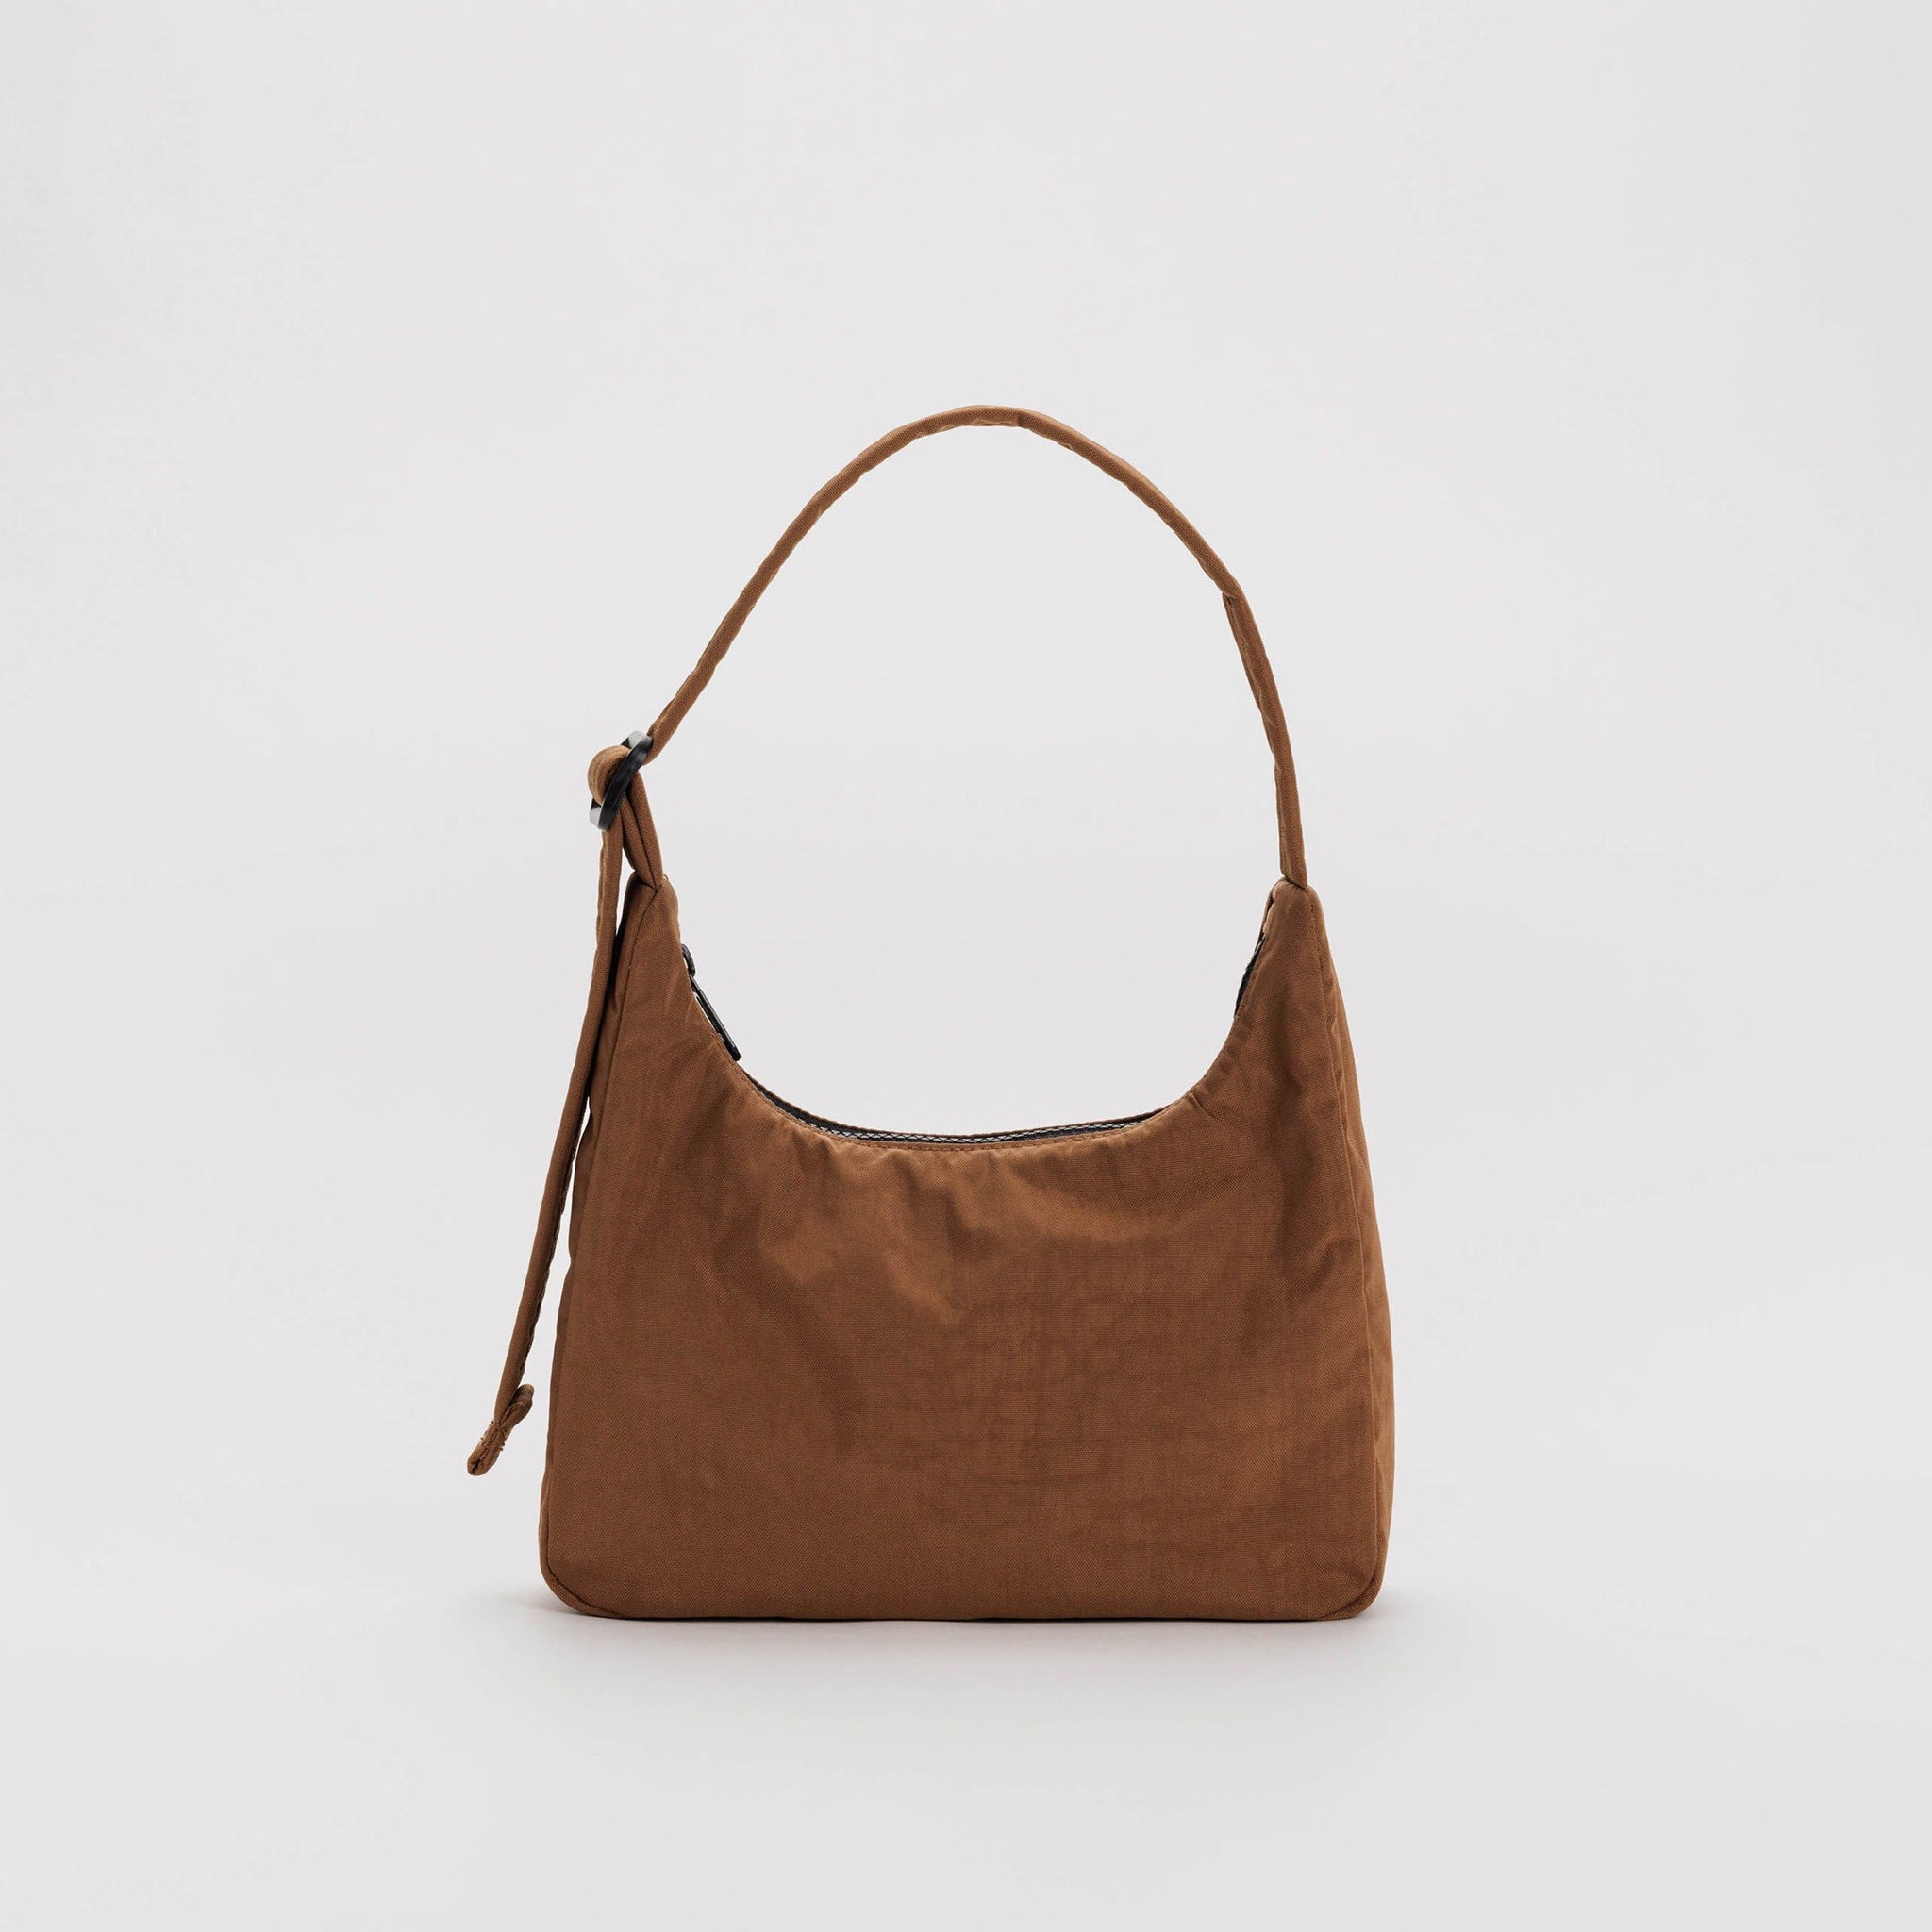 A brown nylon shoulder bag with a rectangular shape and top zipper, shown standing up.